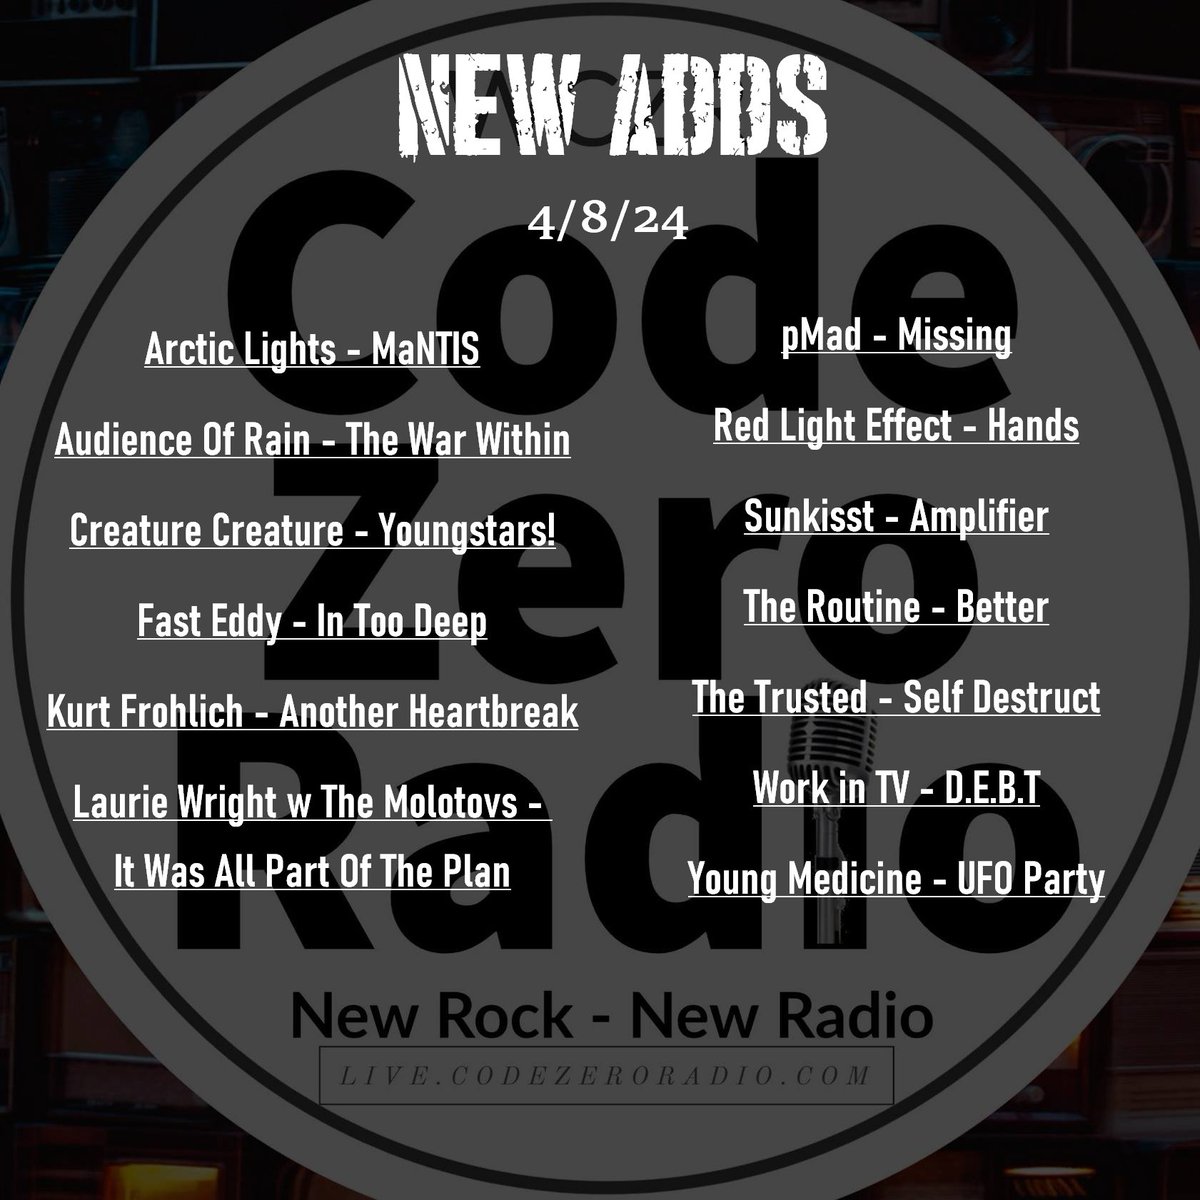 Thirteen is a lucky number! Our new adds eclipse the mainstream with blinding awesomeness! Now in rotation PLUS featured on this weeks Fresh Rocks playlist! #app #rock #alternative #android #iPhone #streaming #appstore #Nobex #website #TuneIn #radiogarden #live365radio